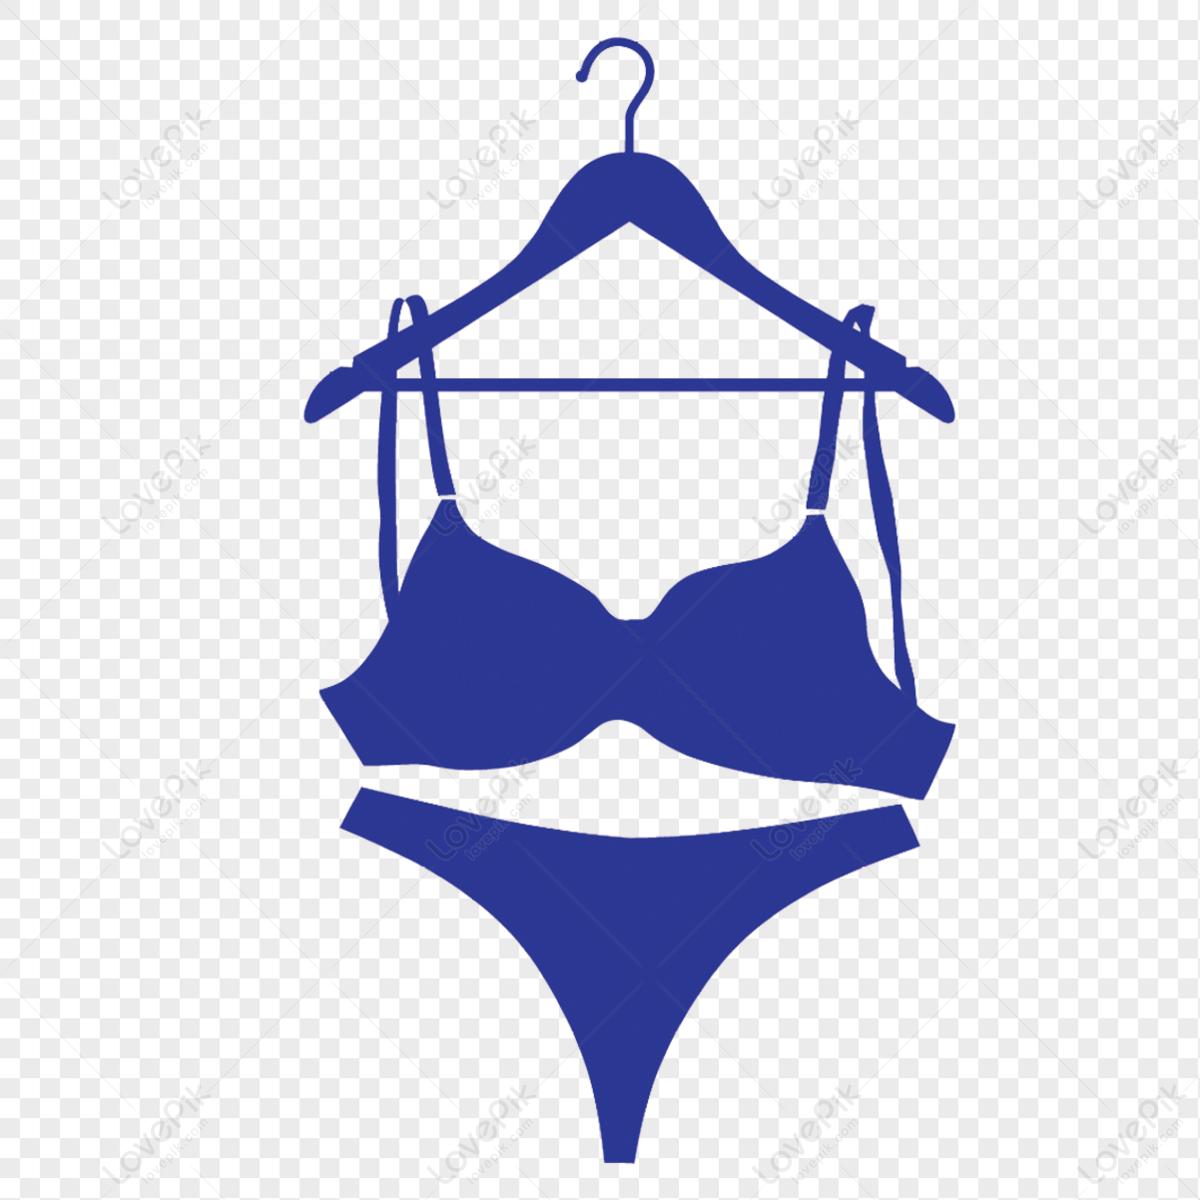 Vector Illustration Of Underwear Icons For Men And Women In Flat Design  Vector, Model, Bikini, White PNG and Vector with Transparent Background for  Free Download